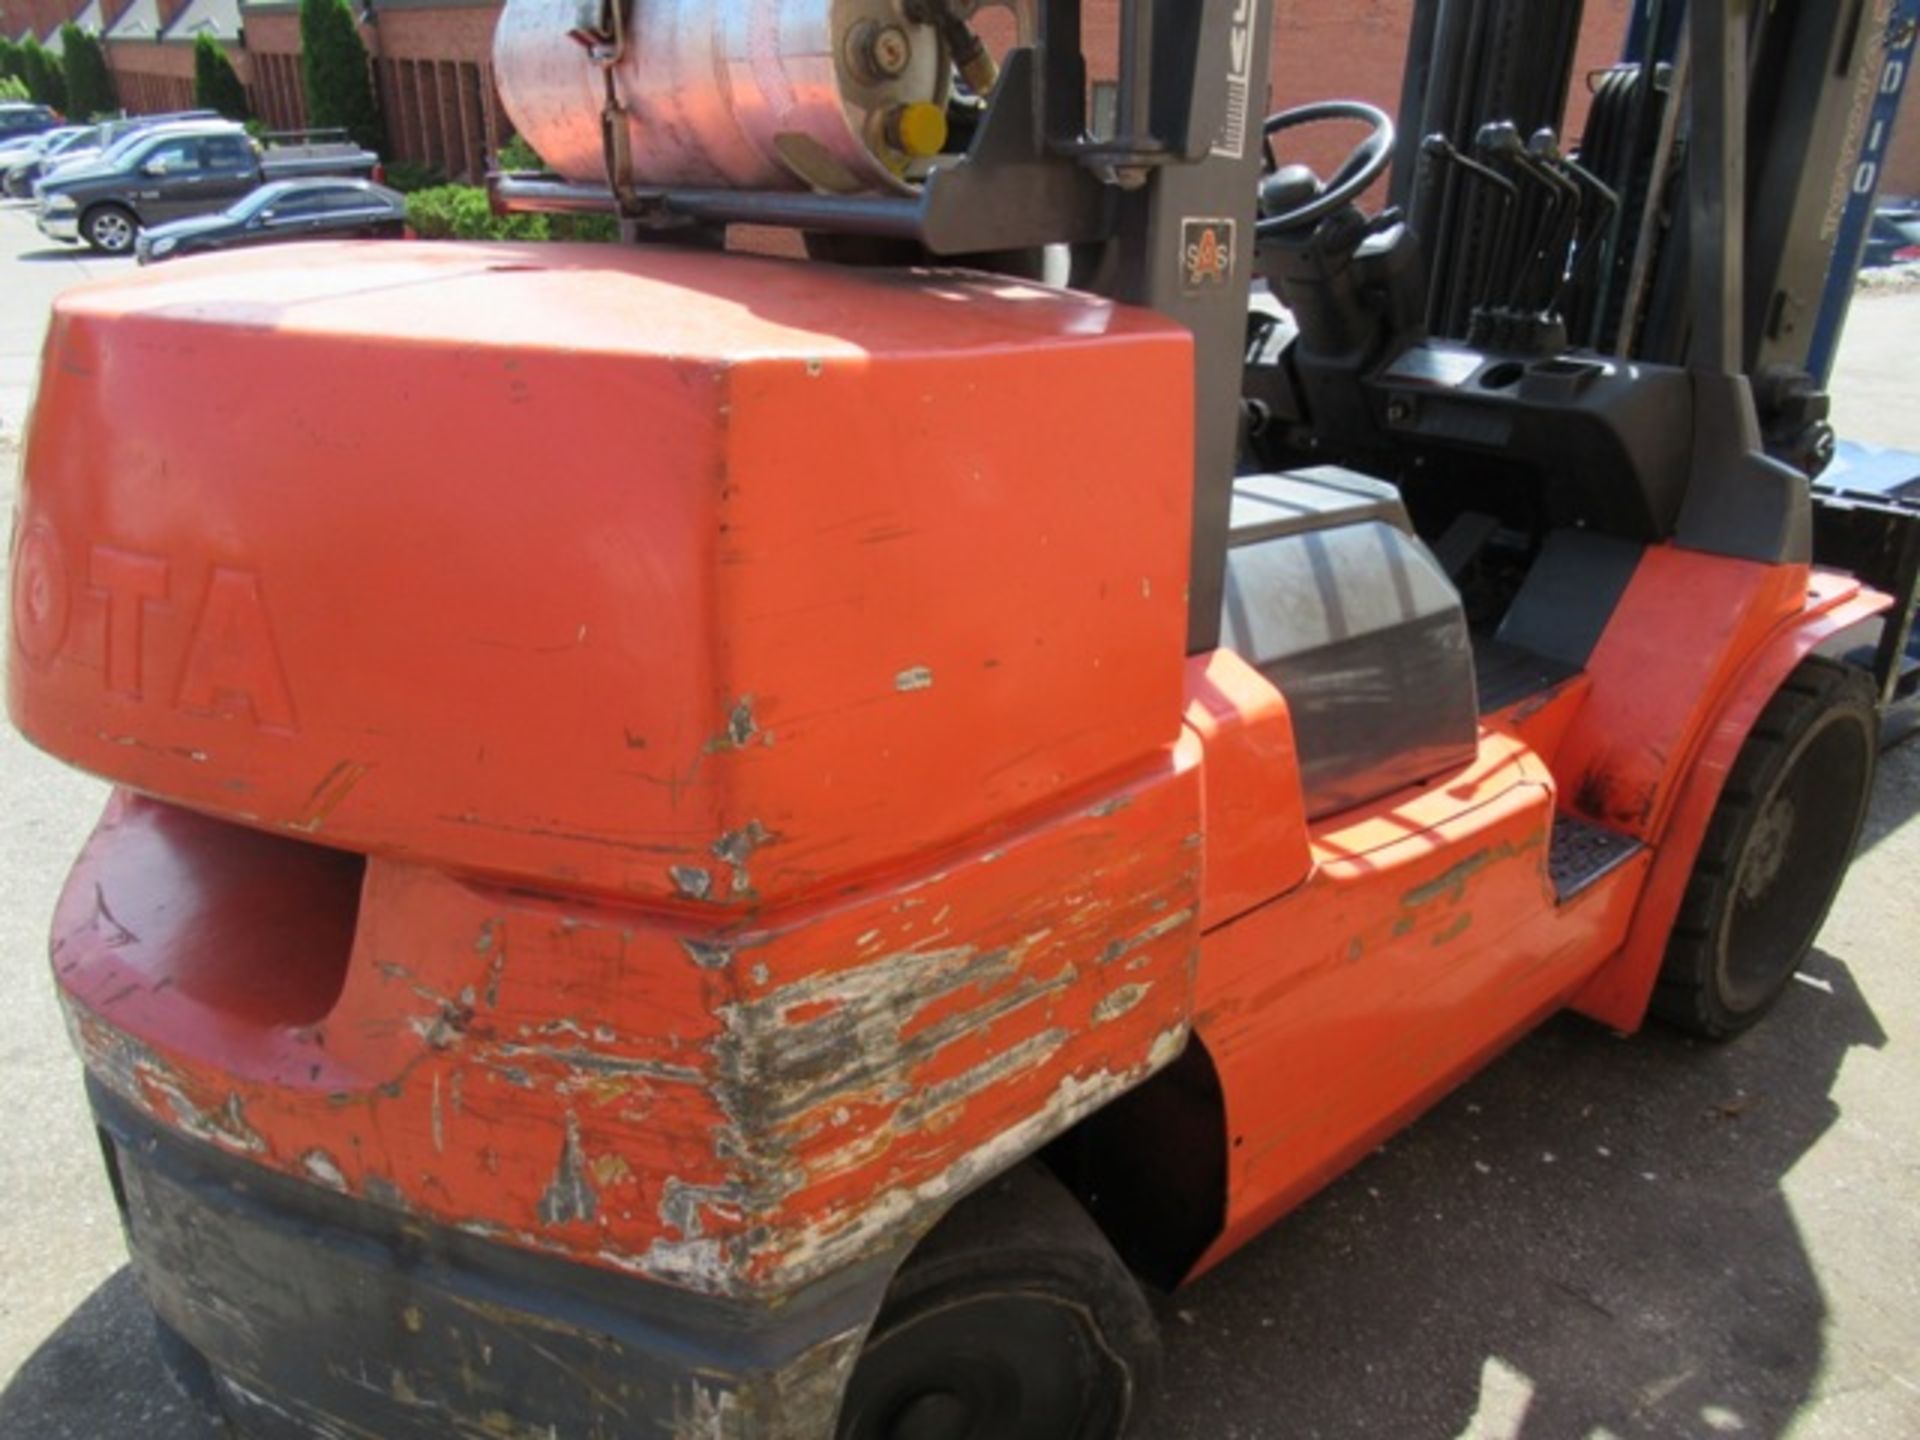 TOYOTA 7F9CU70 PROPANE FORKLIFT, 11,800# CAP., 3 STAGE W/SIDE SHIFT, SN 61421, NO TANK - Image 3 of 3